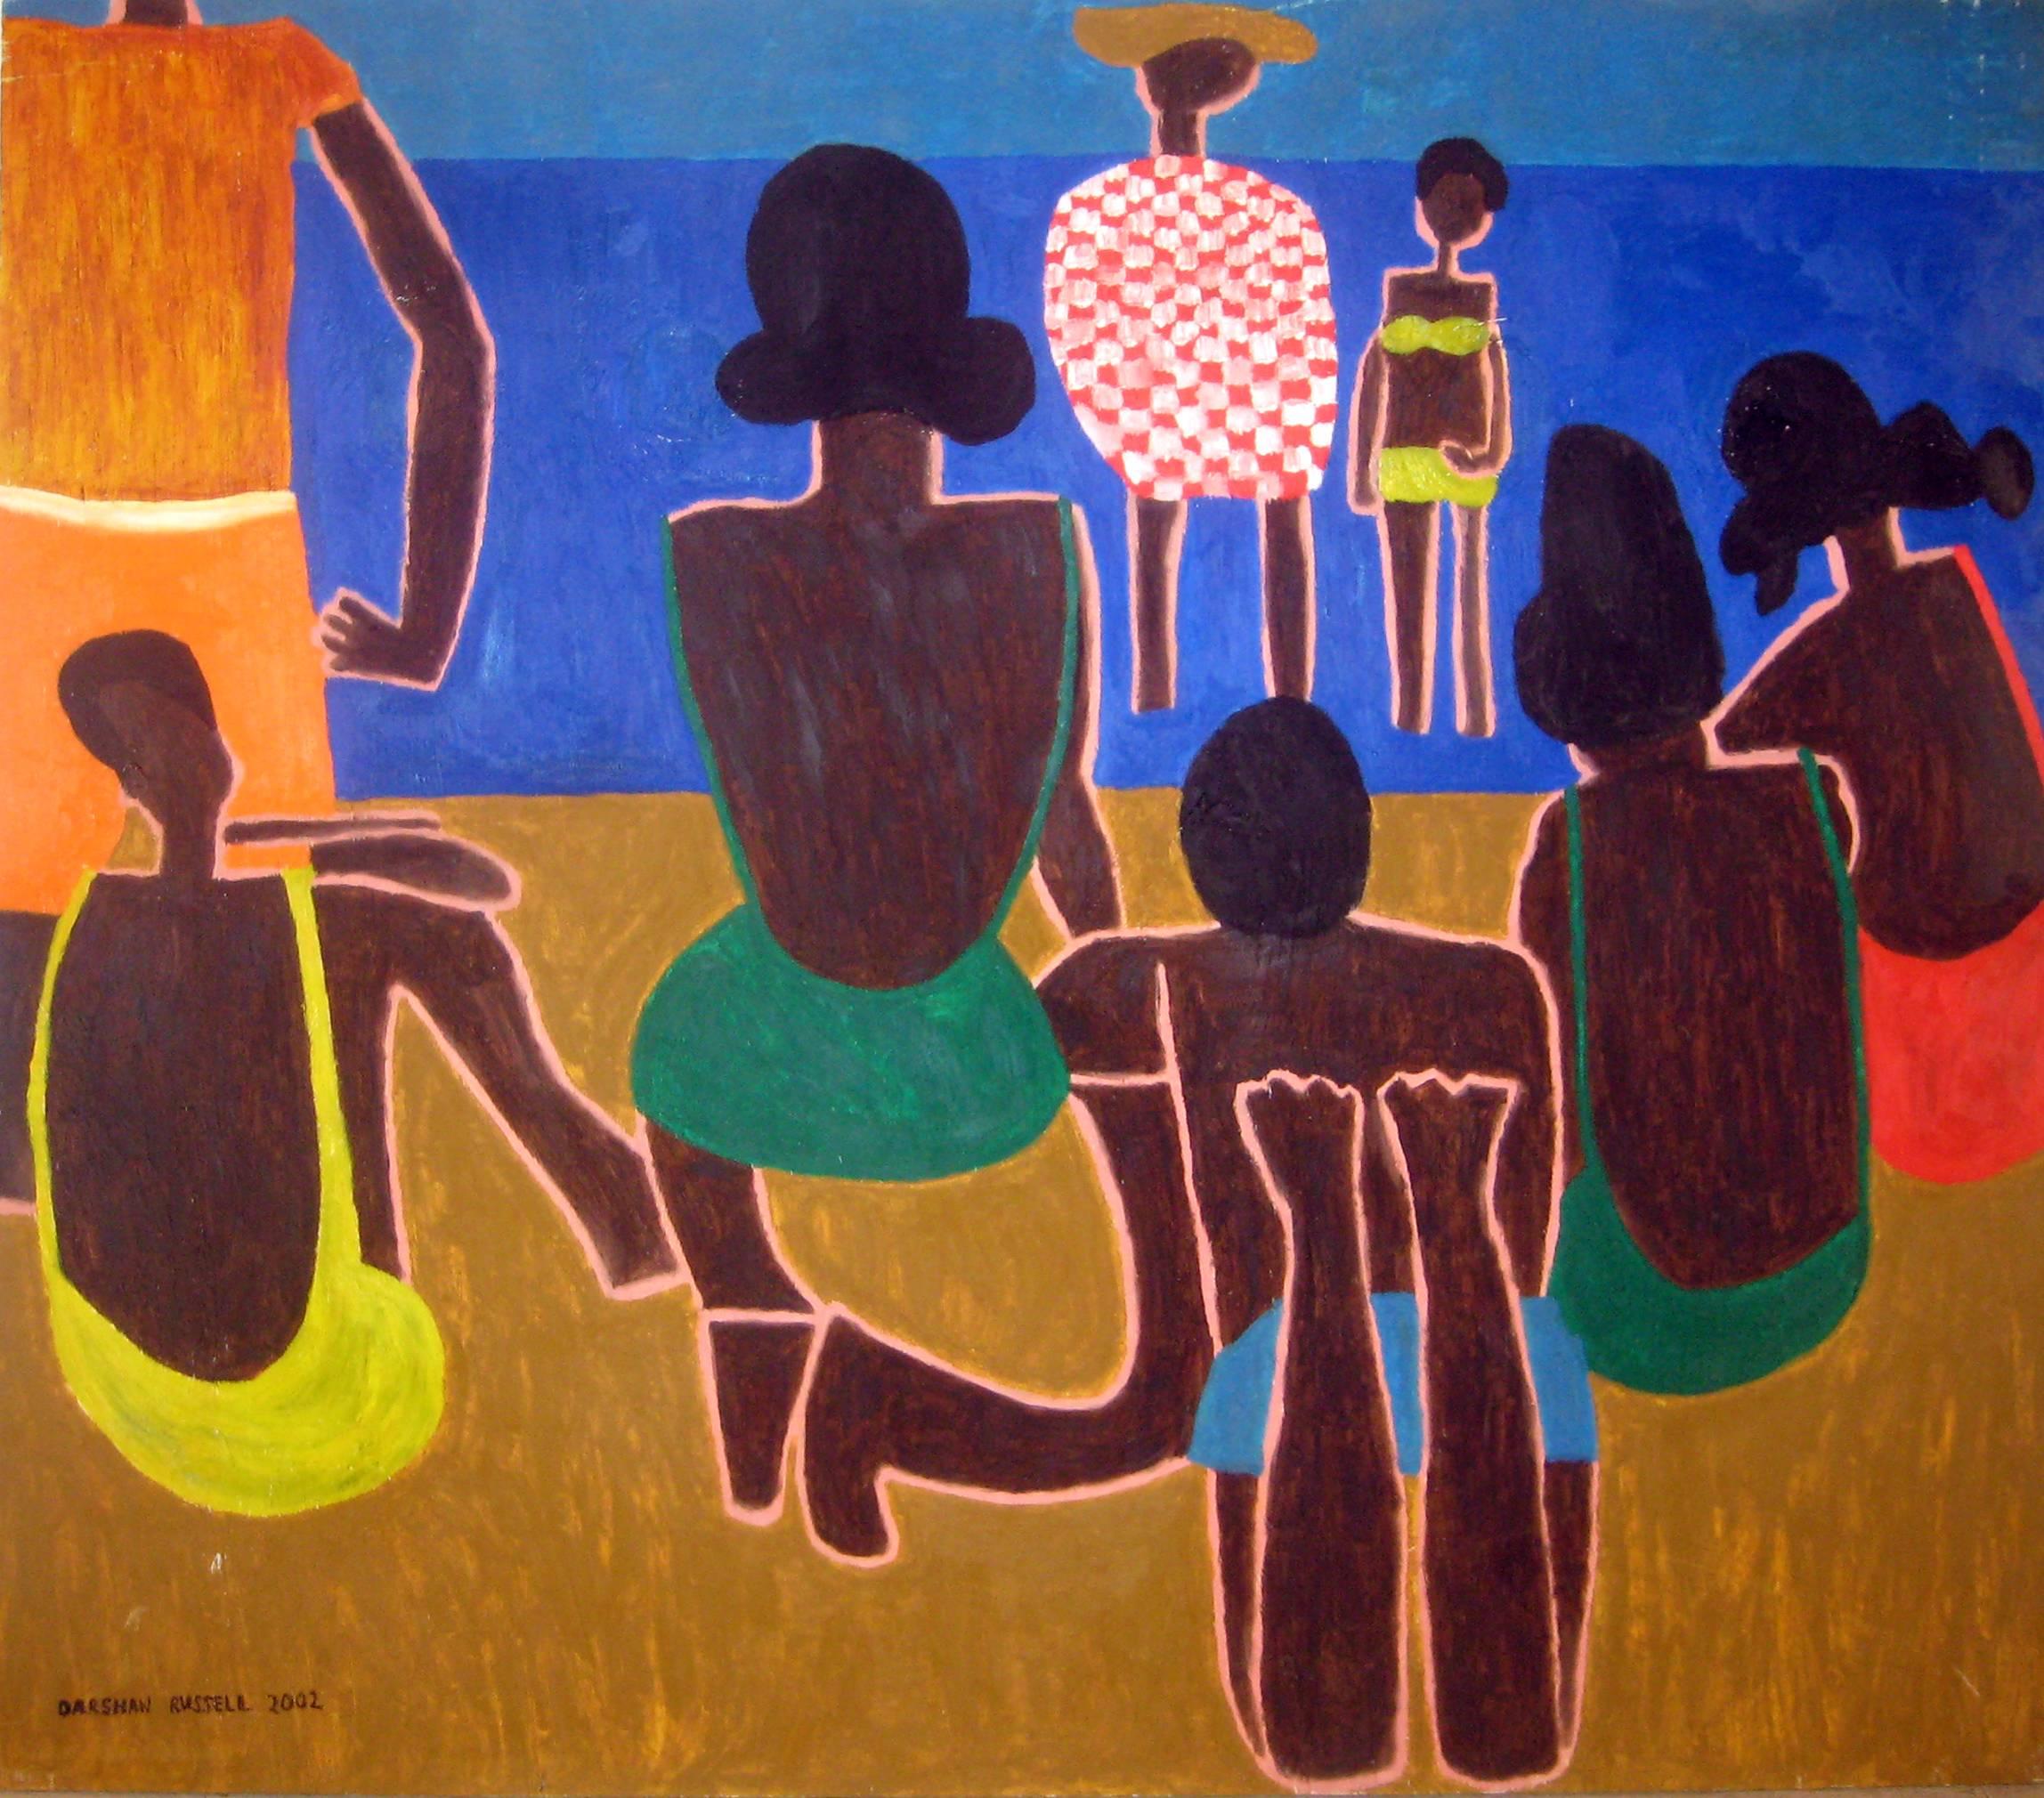 Darshan Russell Landscape Painting - Beach (Naive Artist paints Family at the Beach in Cubist Style)